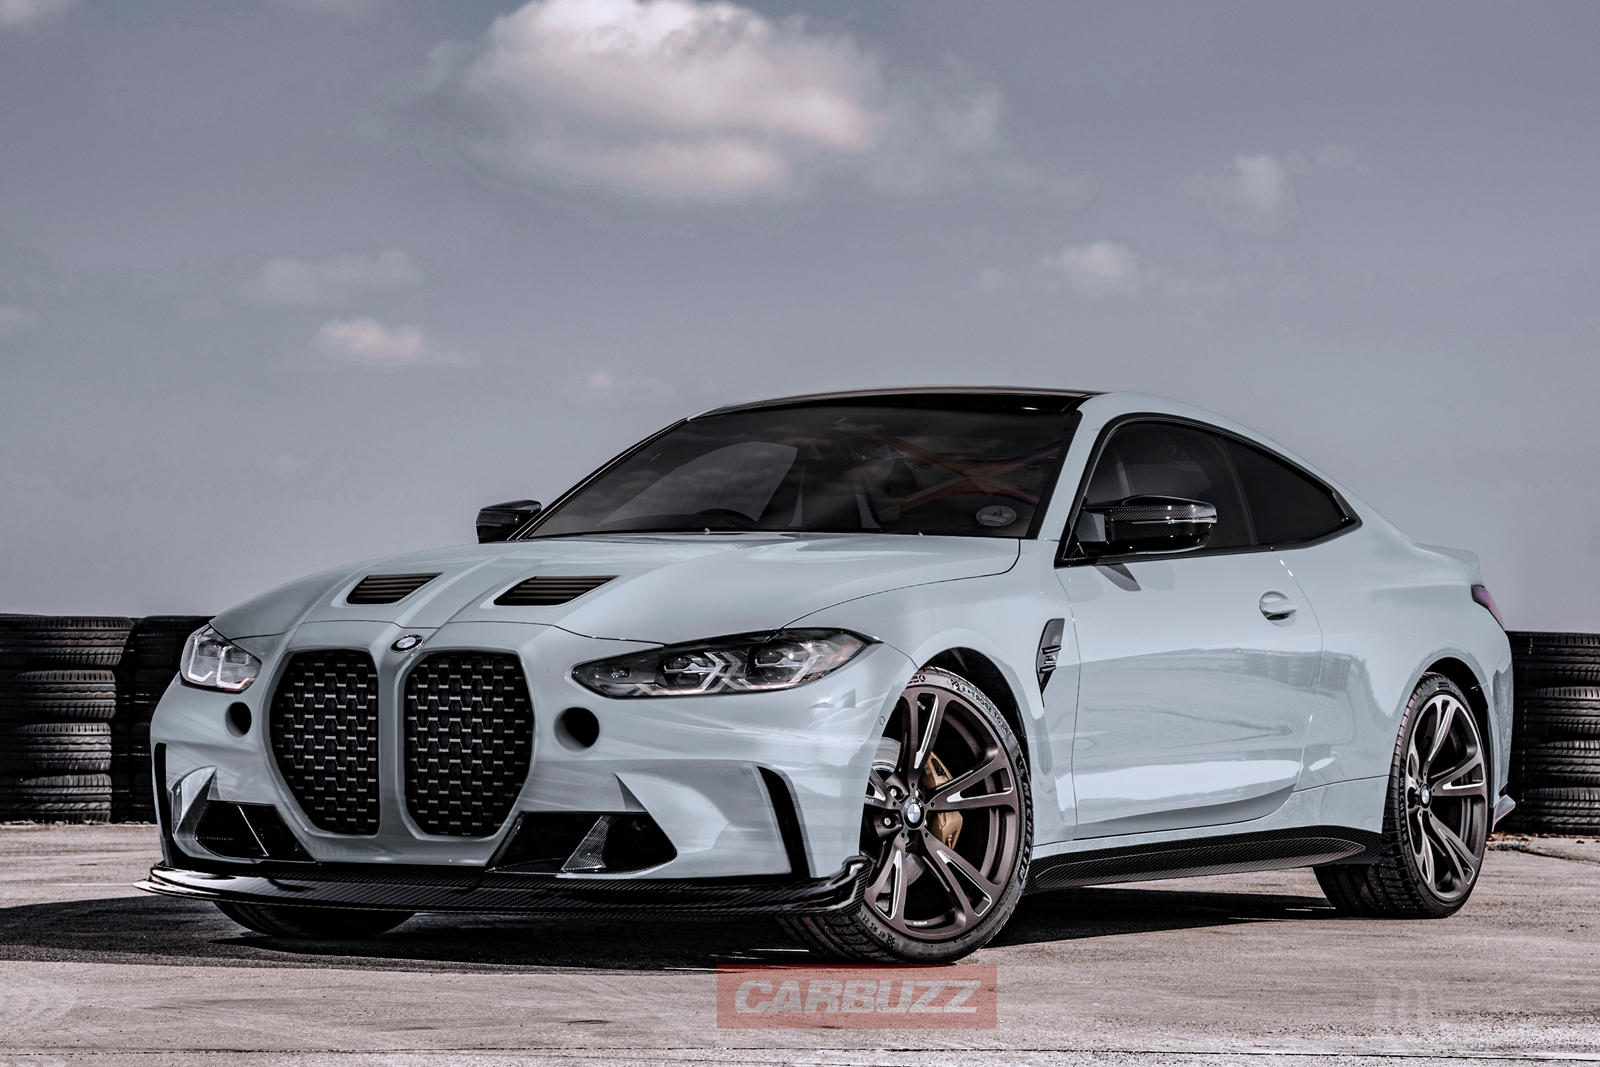 Get Excited For The BMW M4 CSL CarBuzz